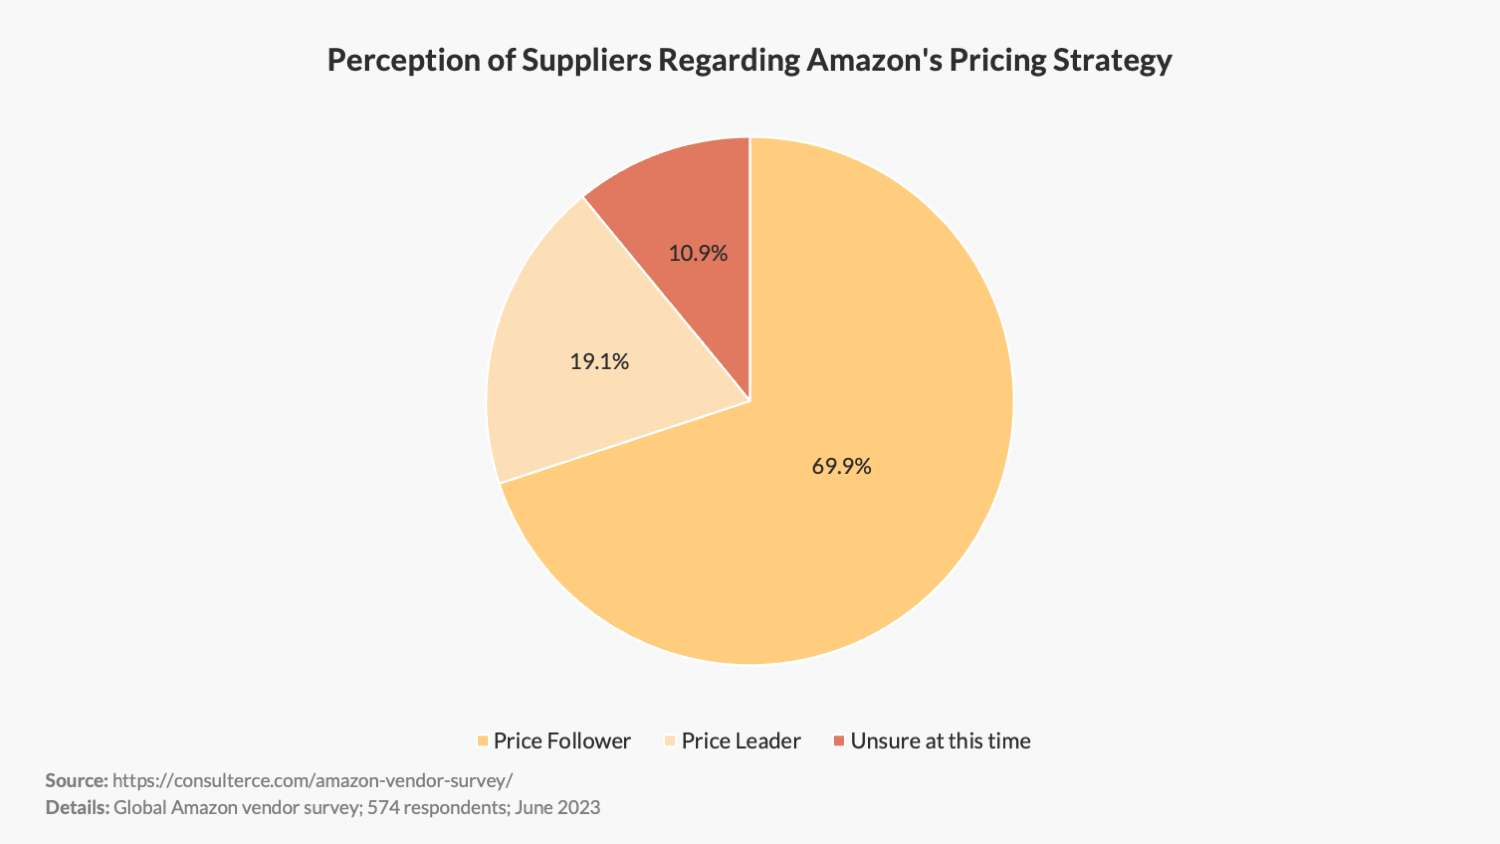 Perception of Suppliers Regarding Amazon's Pricing Strategy